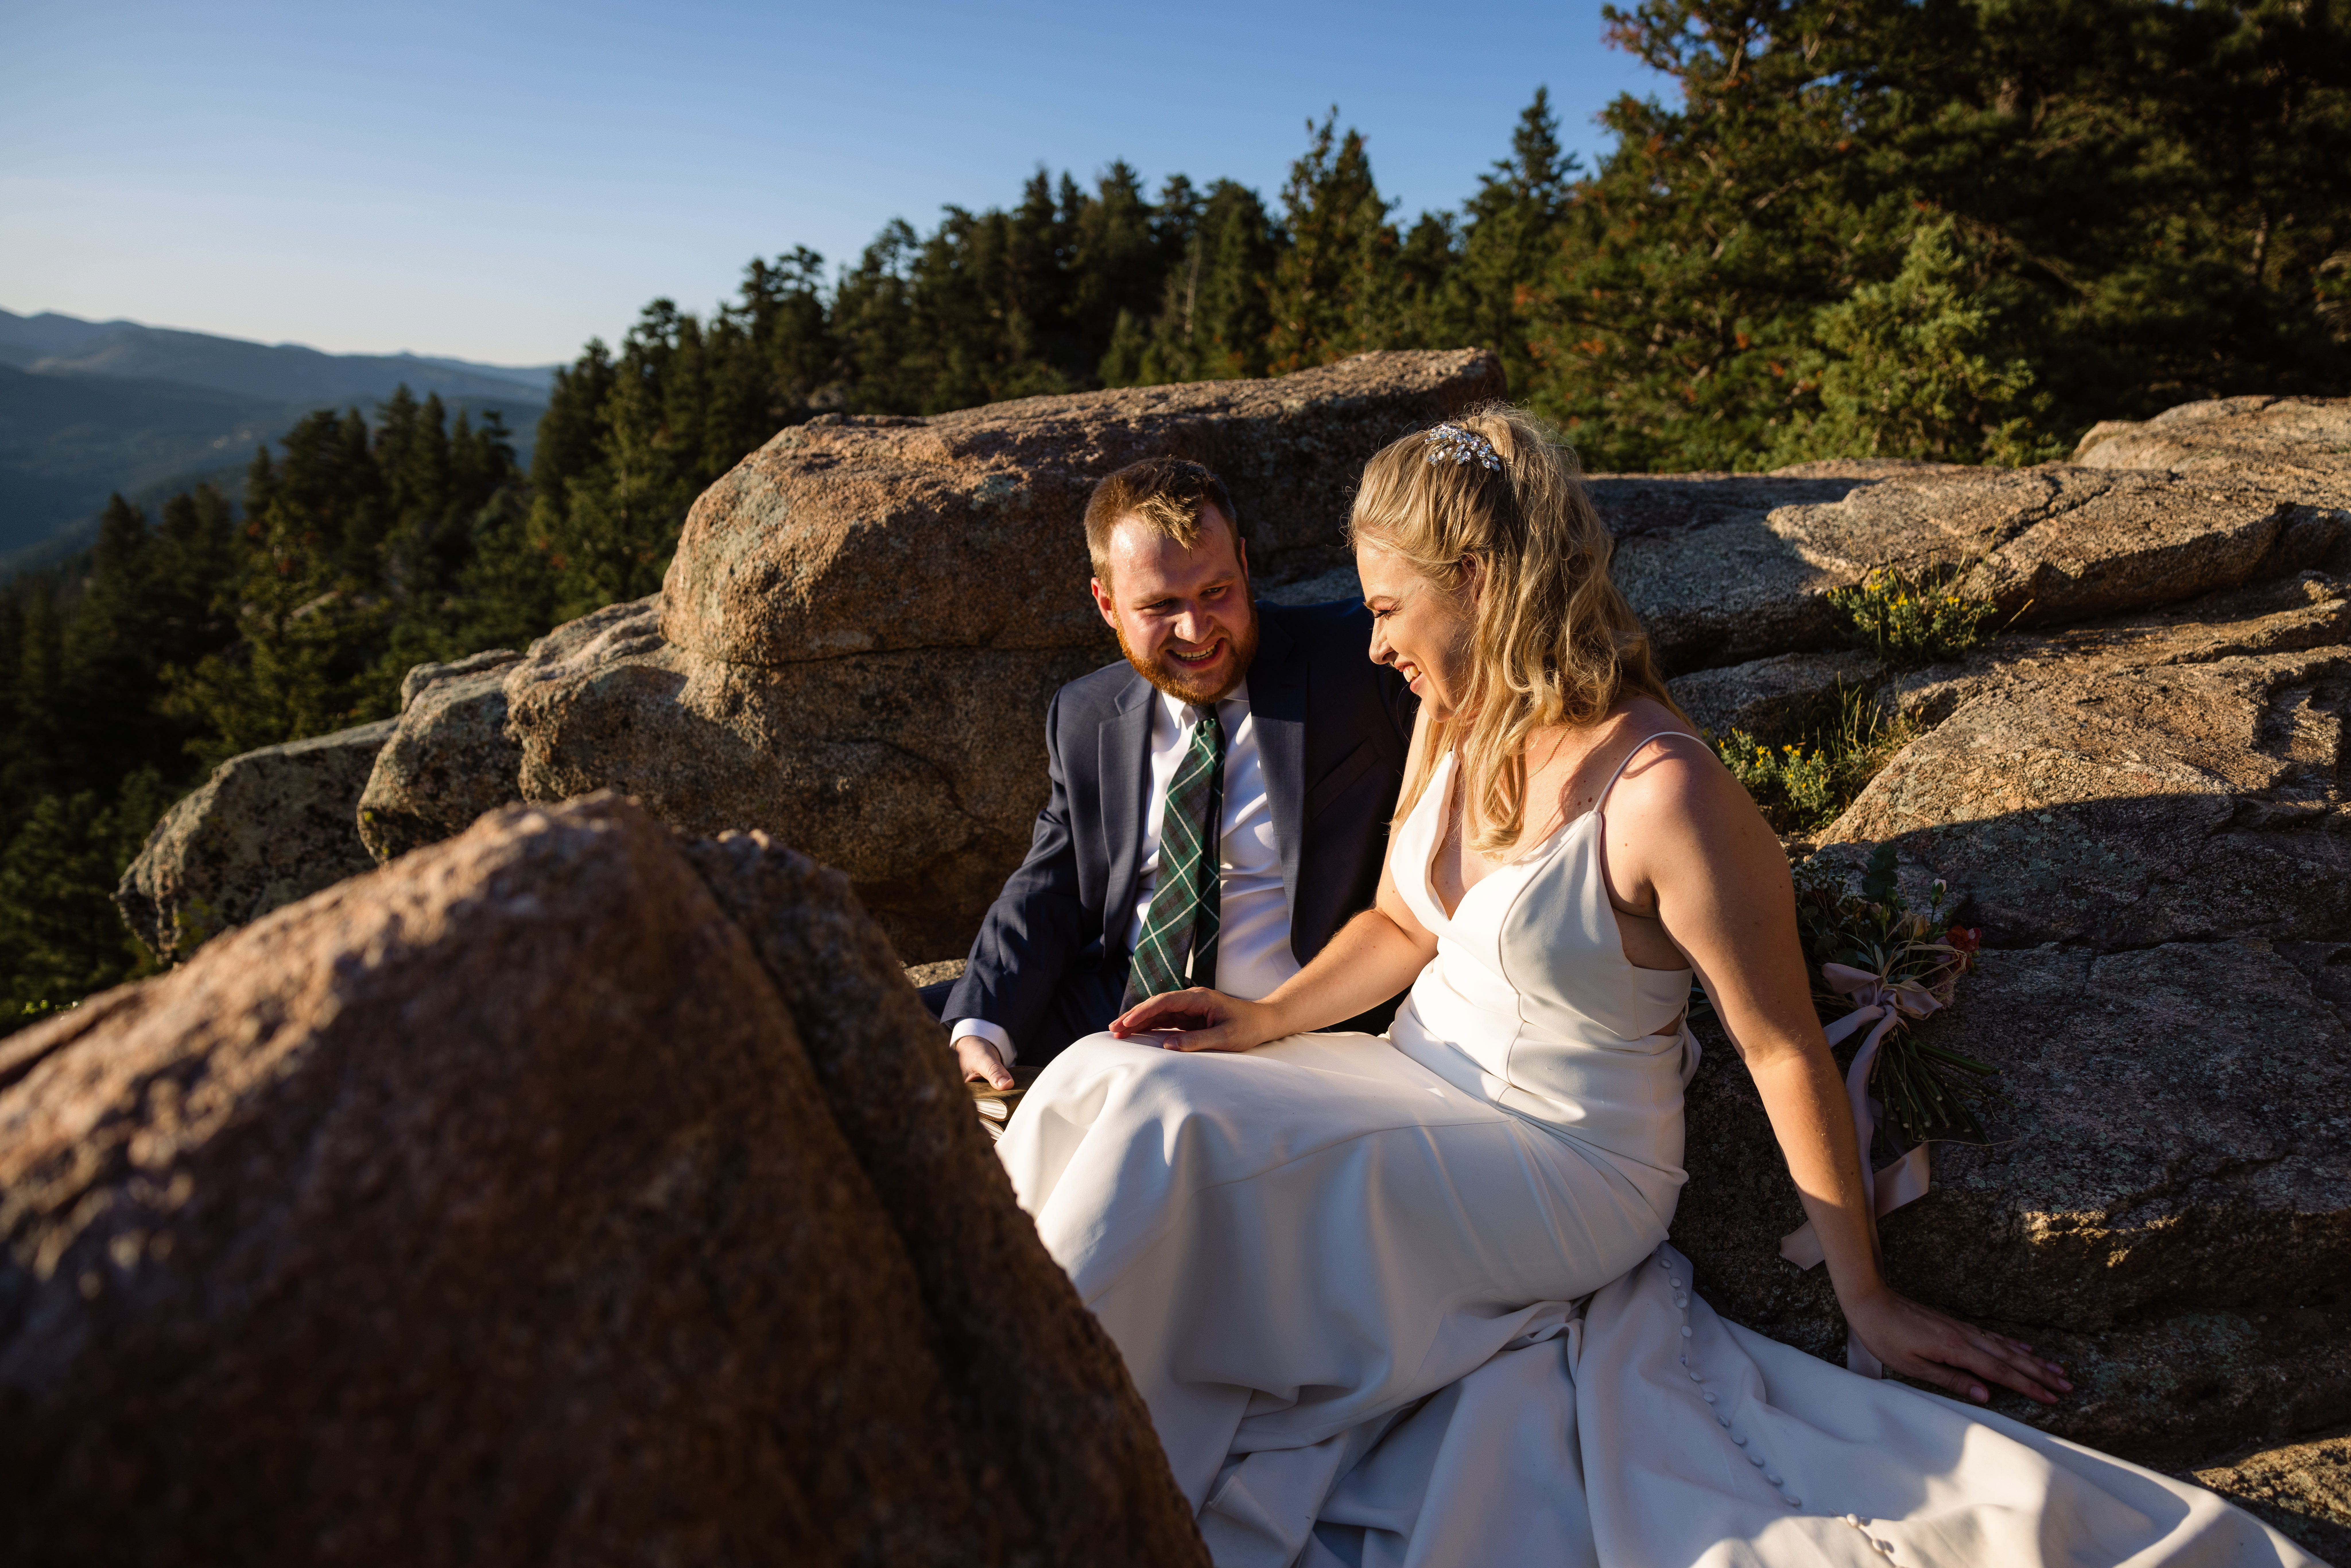 The bride and groom laughing together at sunset after their Sunrise Amphitheater wedding.